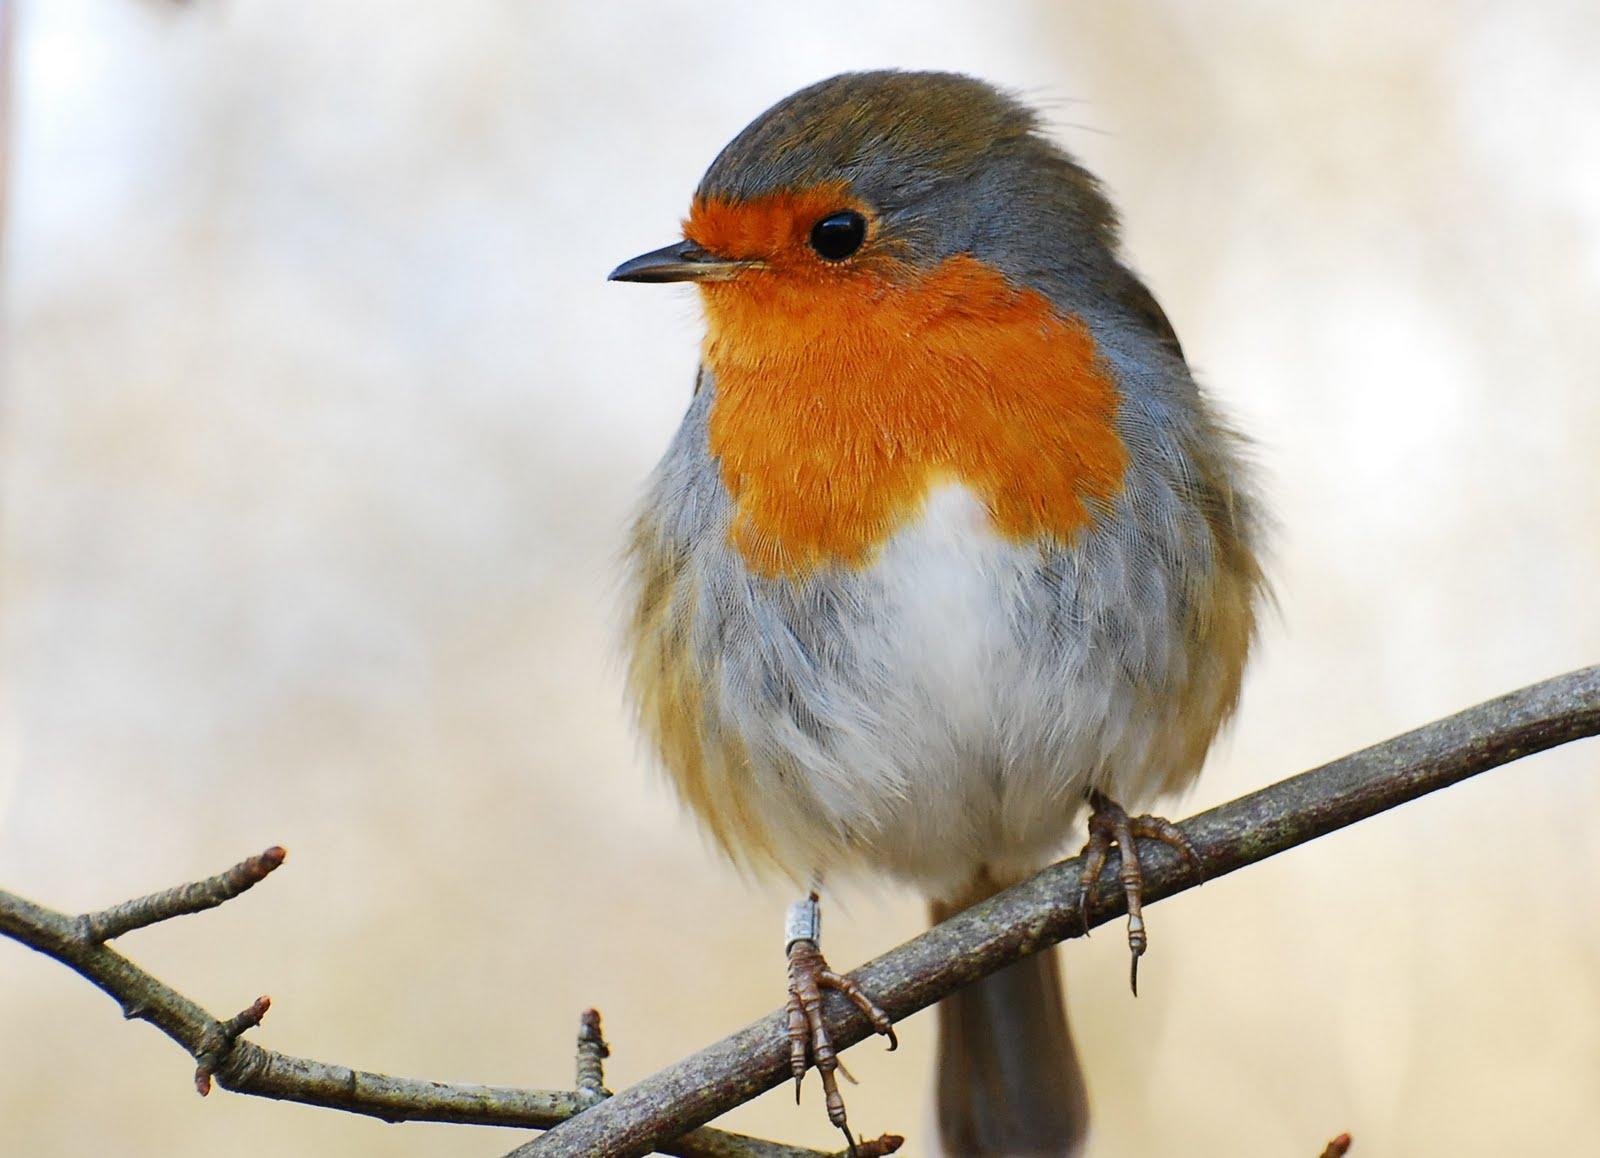 Gallery of Image of a Robin on Animal Picture Society